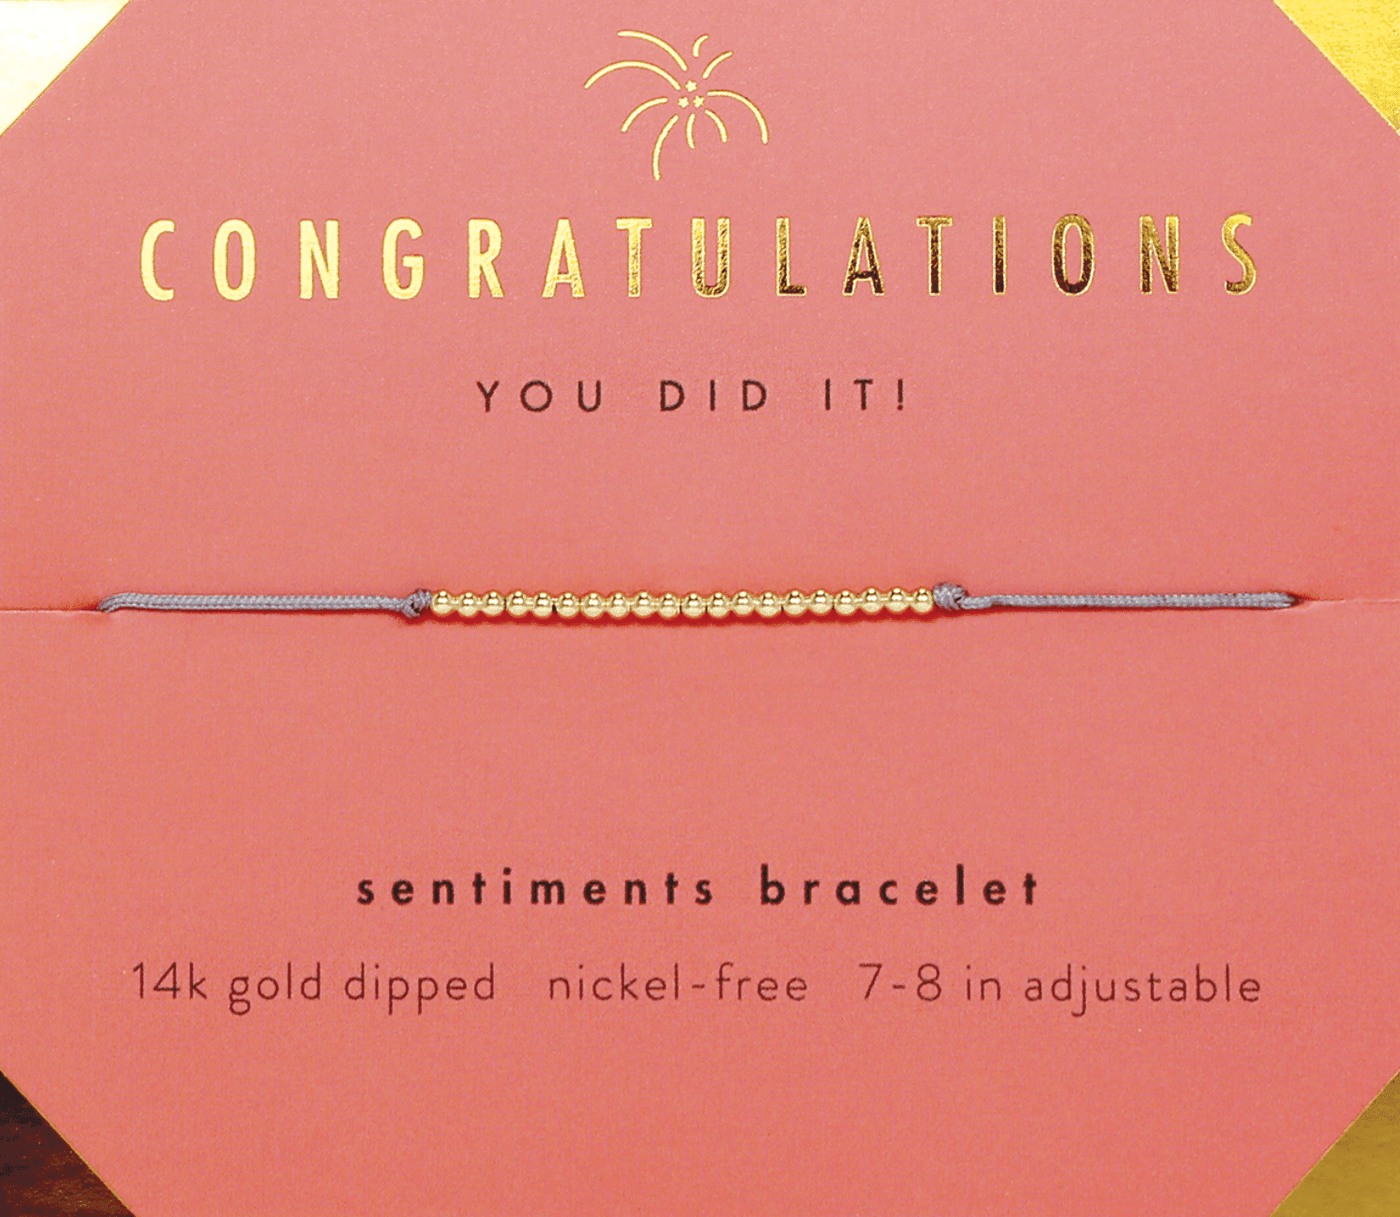 This dainty bracelet is the perfect way to congratulate a loved one on an amazing accomplishment! Packaged on a sweet card that reads, “Congratulations - You Did It!”, this beaded bracelet reminds everyone to take pride in their big moments.